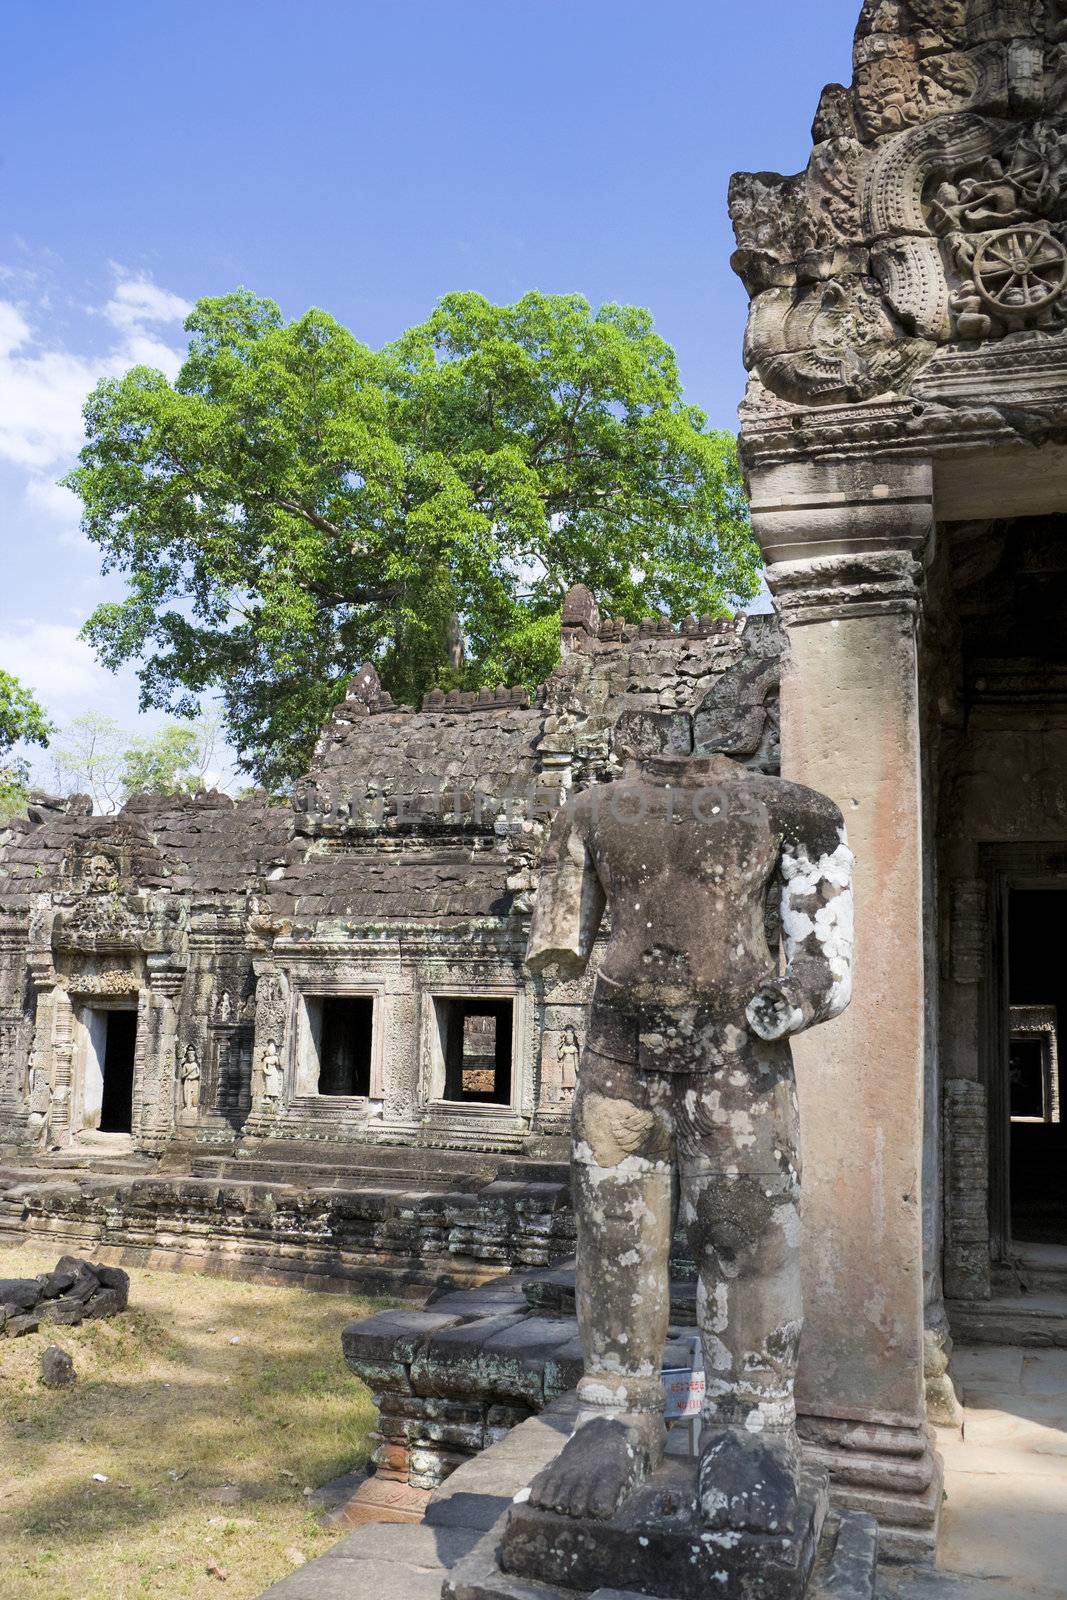 Image of UNESCO's World Heritage Site of Preah Khan, located at Siem Reap, Cambodia.